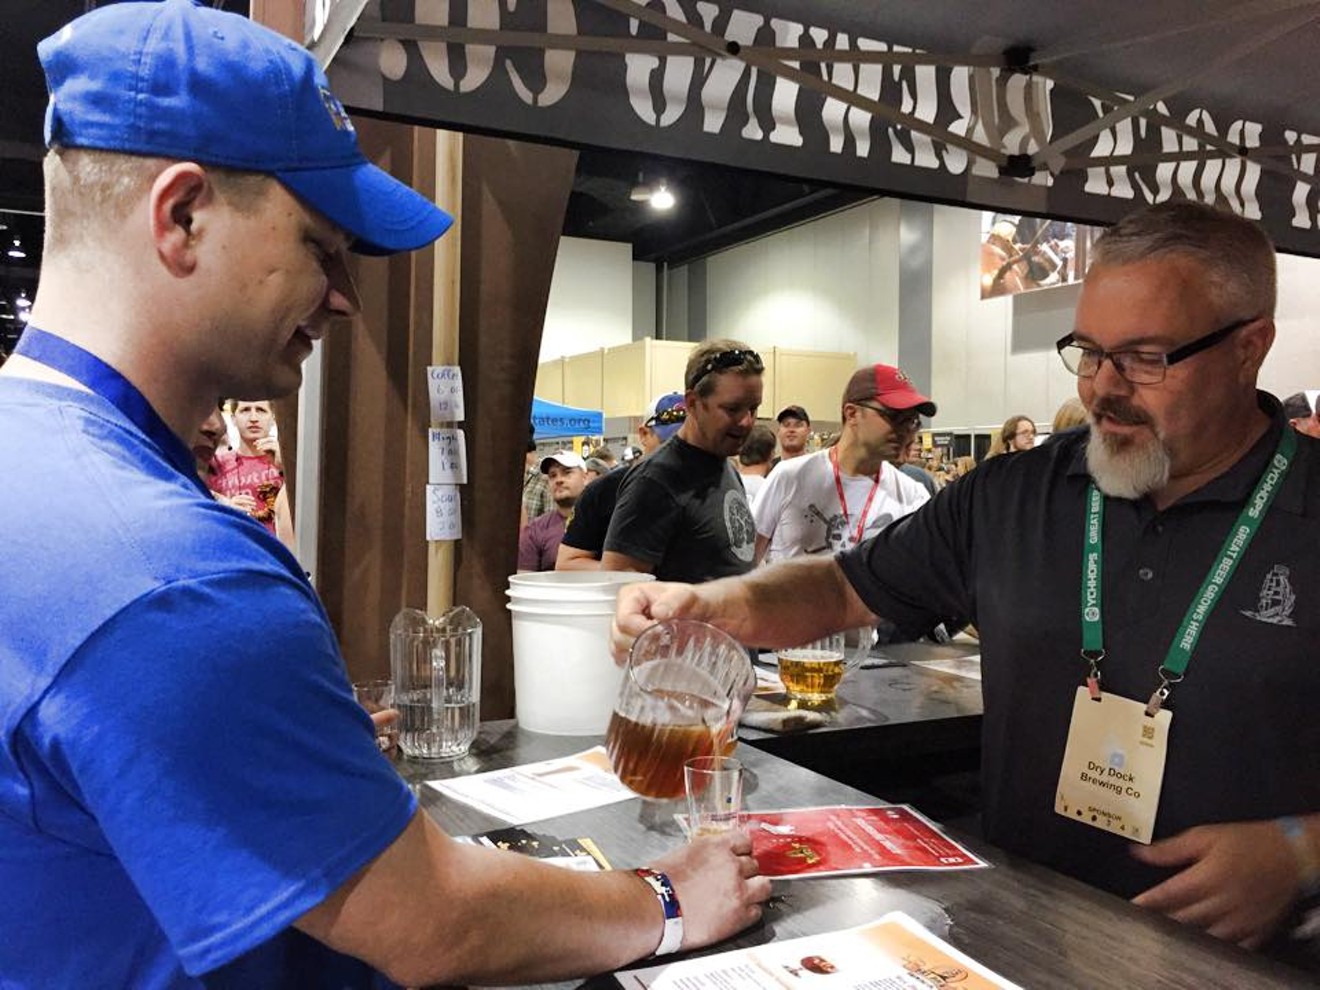 Dry Dock Brewing co-founder Kevin DeLange pours beer at GABF in 2015.